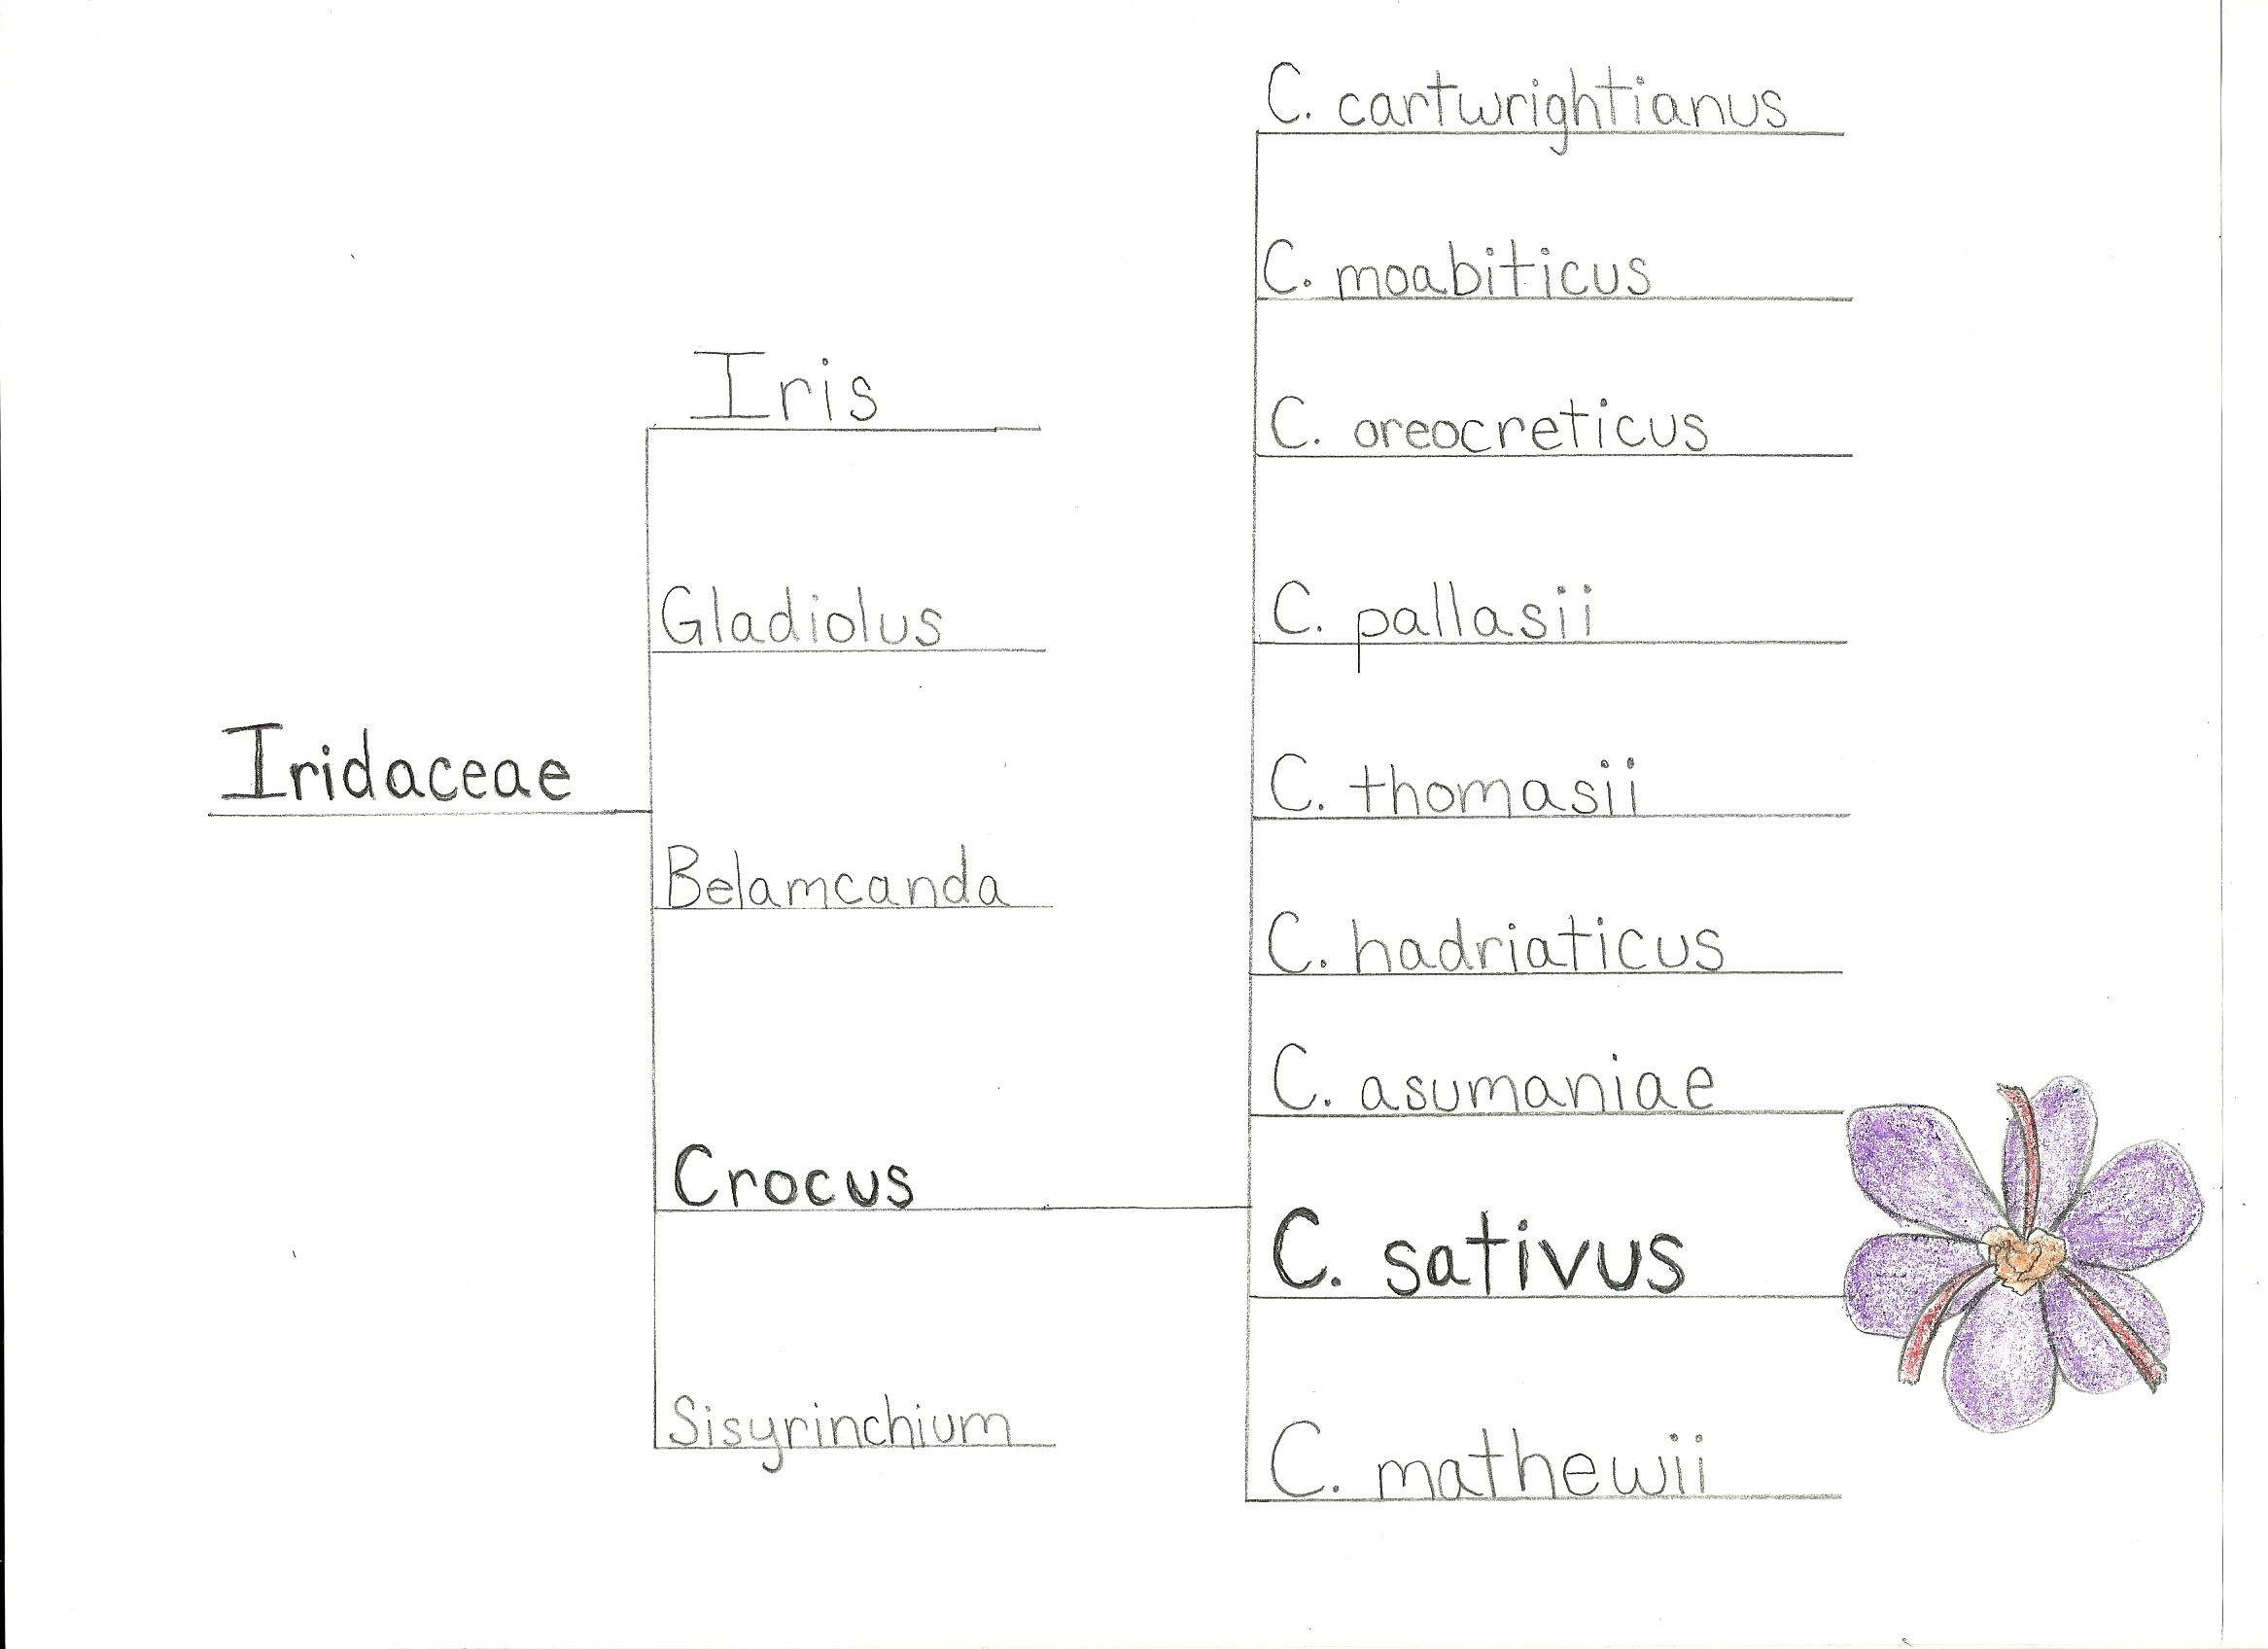 A more detailed phylogenetic tree (my own picture, flower drawn by K)ayla Kirchner